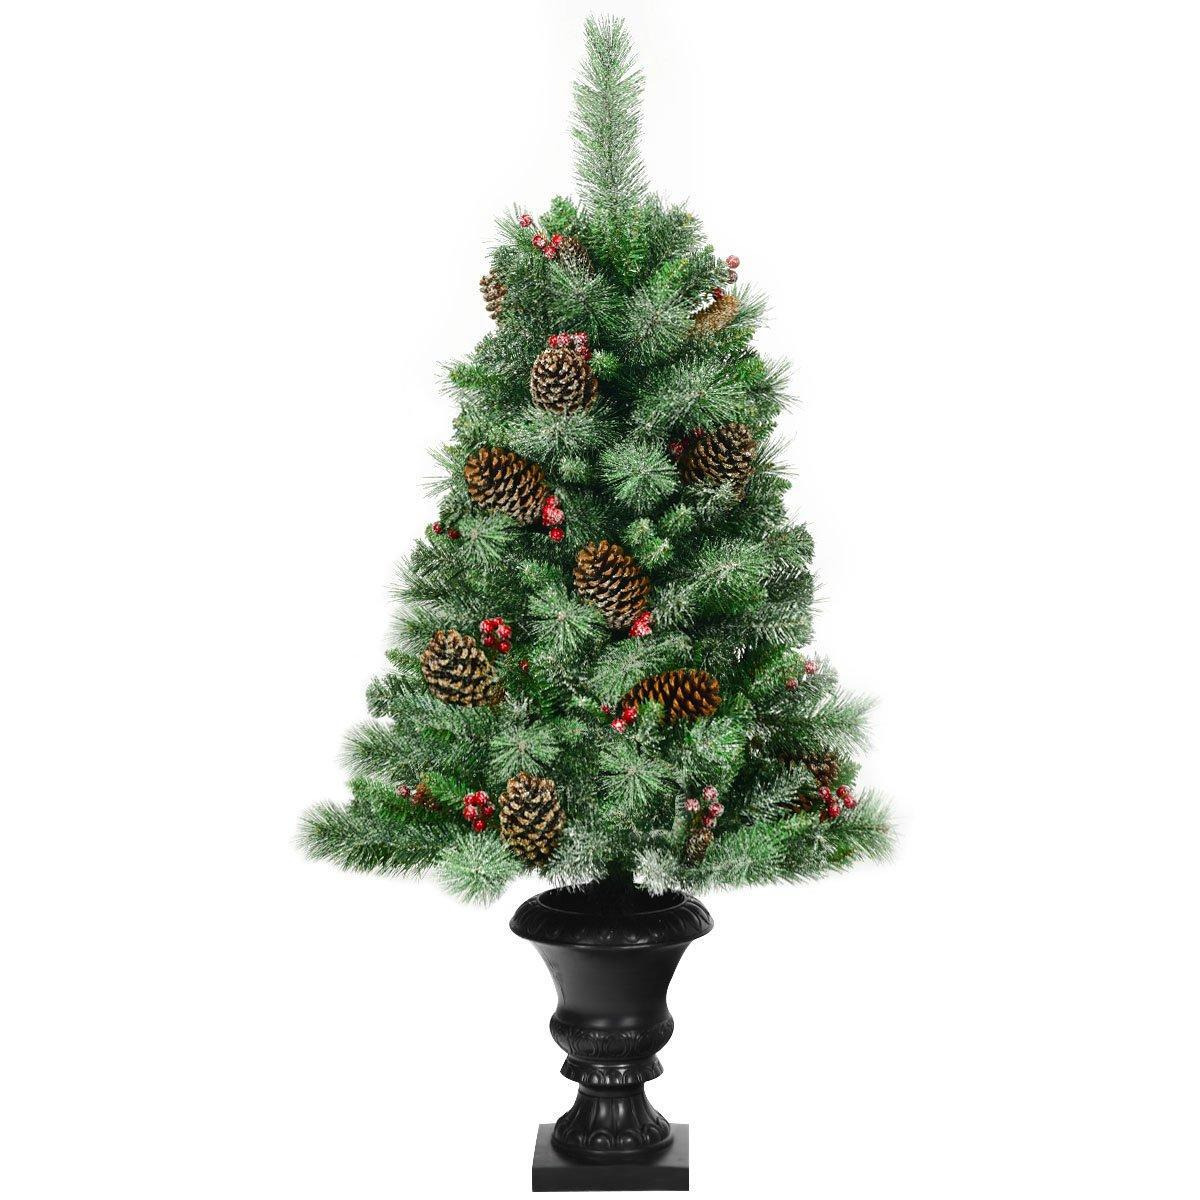 4FT/120cm Snow Flocked Artificial Christmas Tree Premium Entrance Tree with Pine Cones & Red Berries - image 1